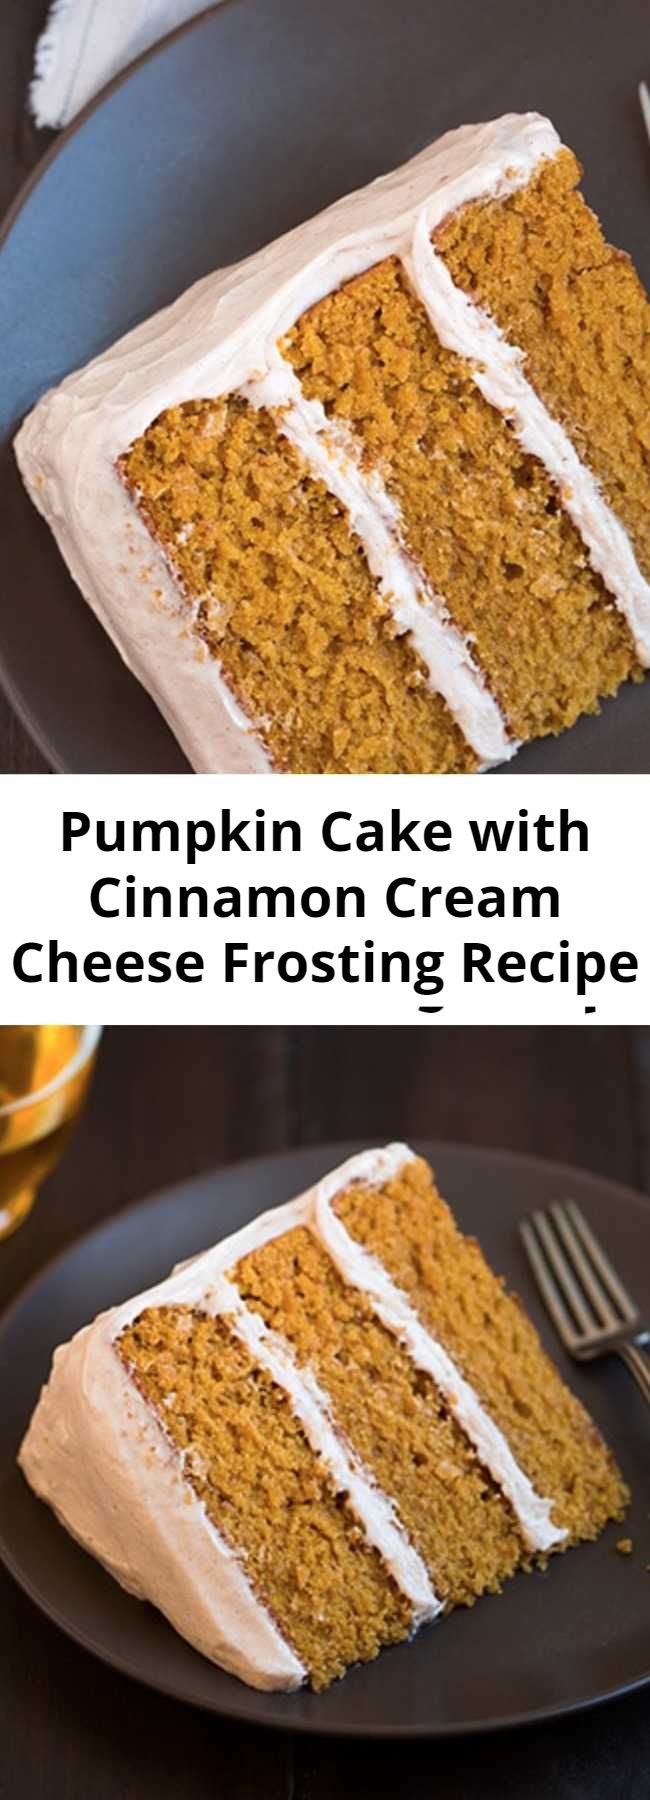 Pumpkin Cake with Cinnamon Cream Cheese Frosting Recipe - The tastiest pumpkin cake! It’s soft and moist with just the right amount of pumpkin and spice, and it's finished with the best frosting! This is one of my favorites! Melt-in-your-mouth delicious!!